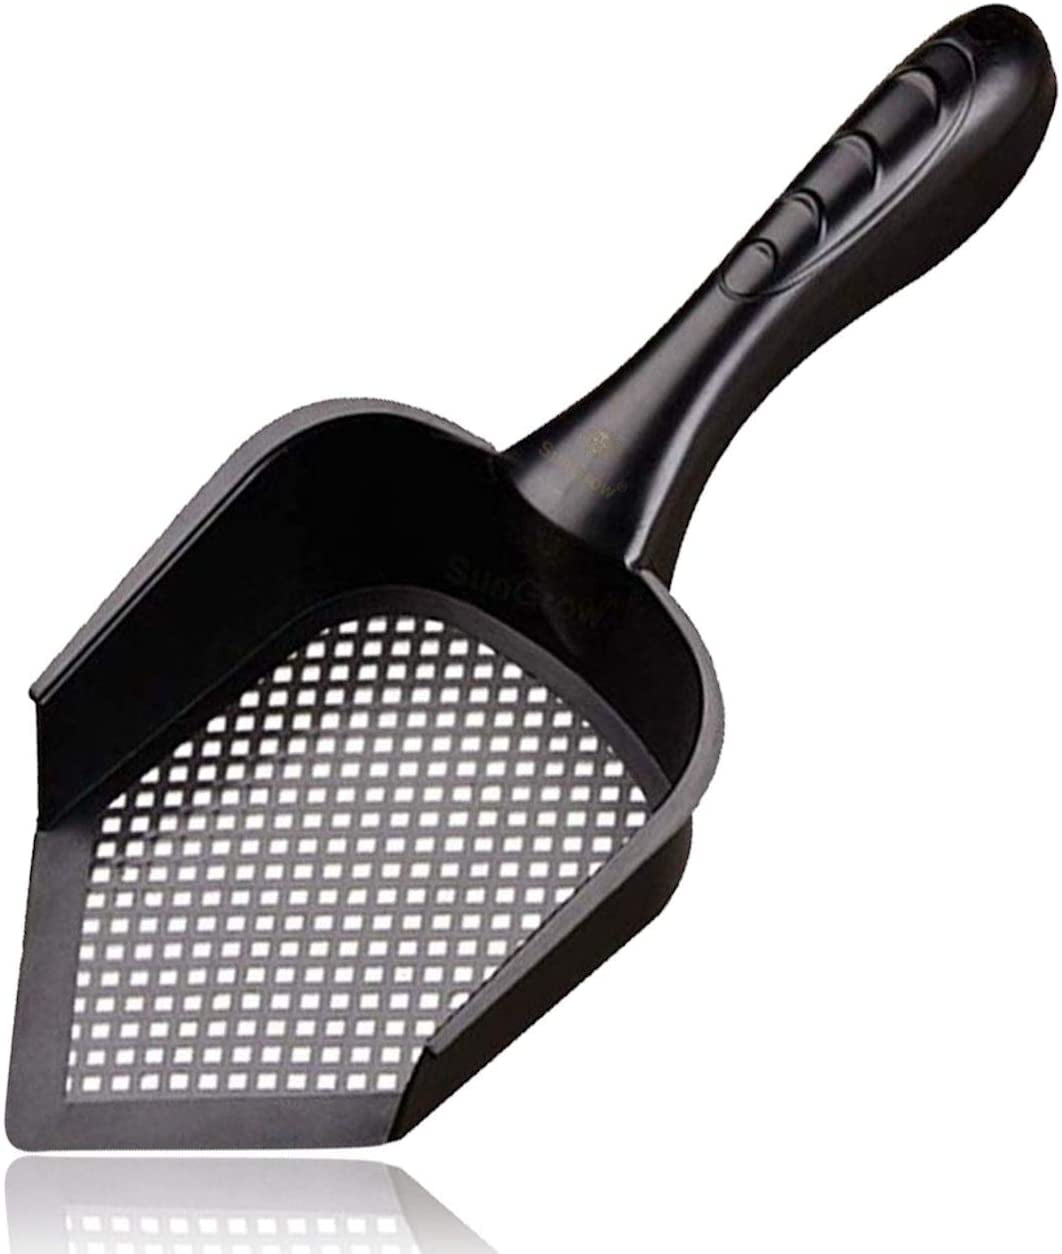 Small Fine Sieve Cleaning Brush